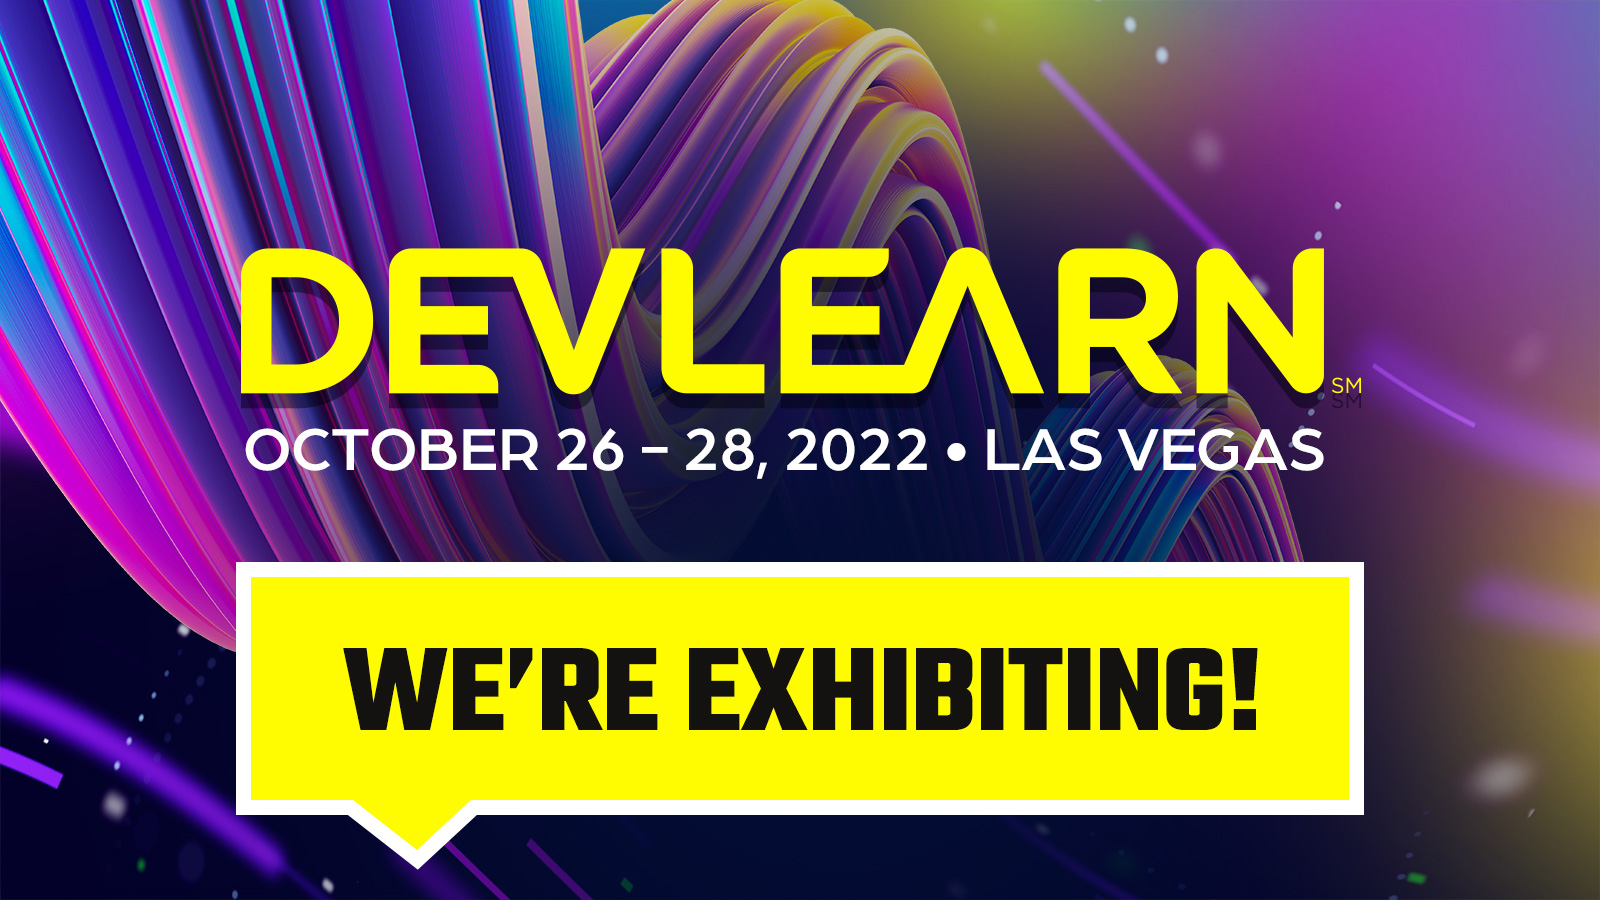 Moodle US at DevLearn 2022